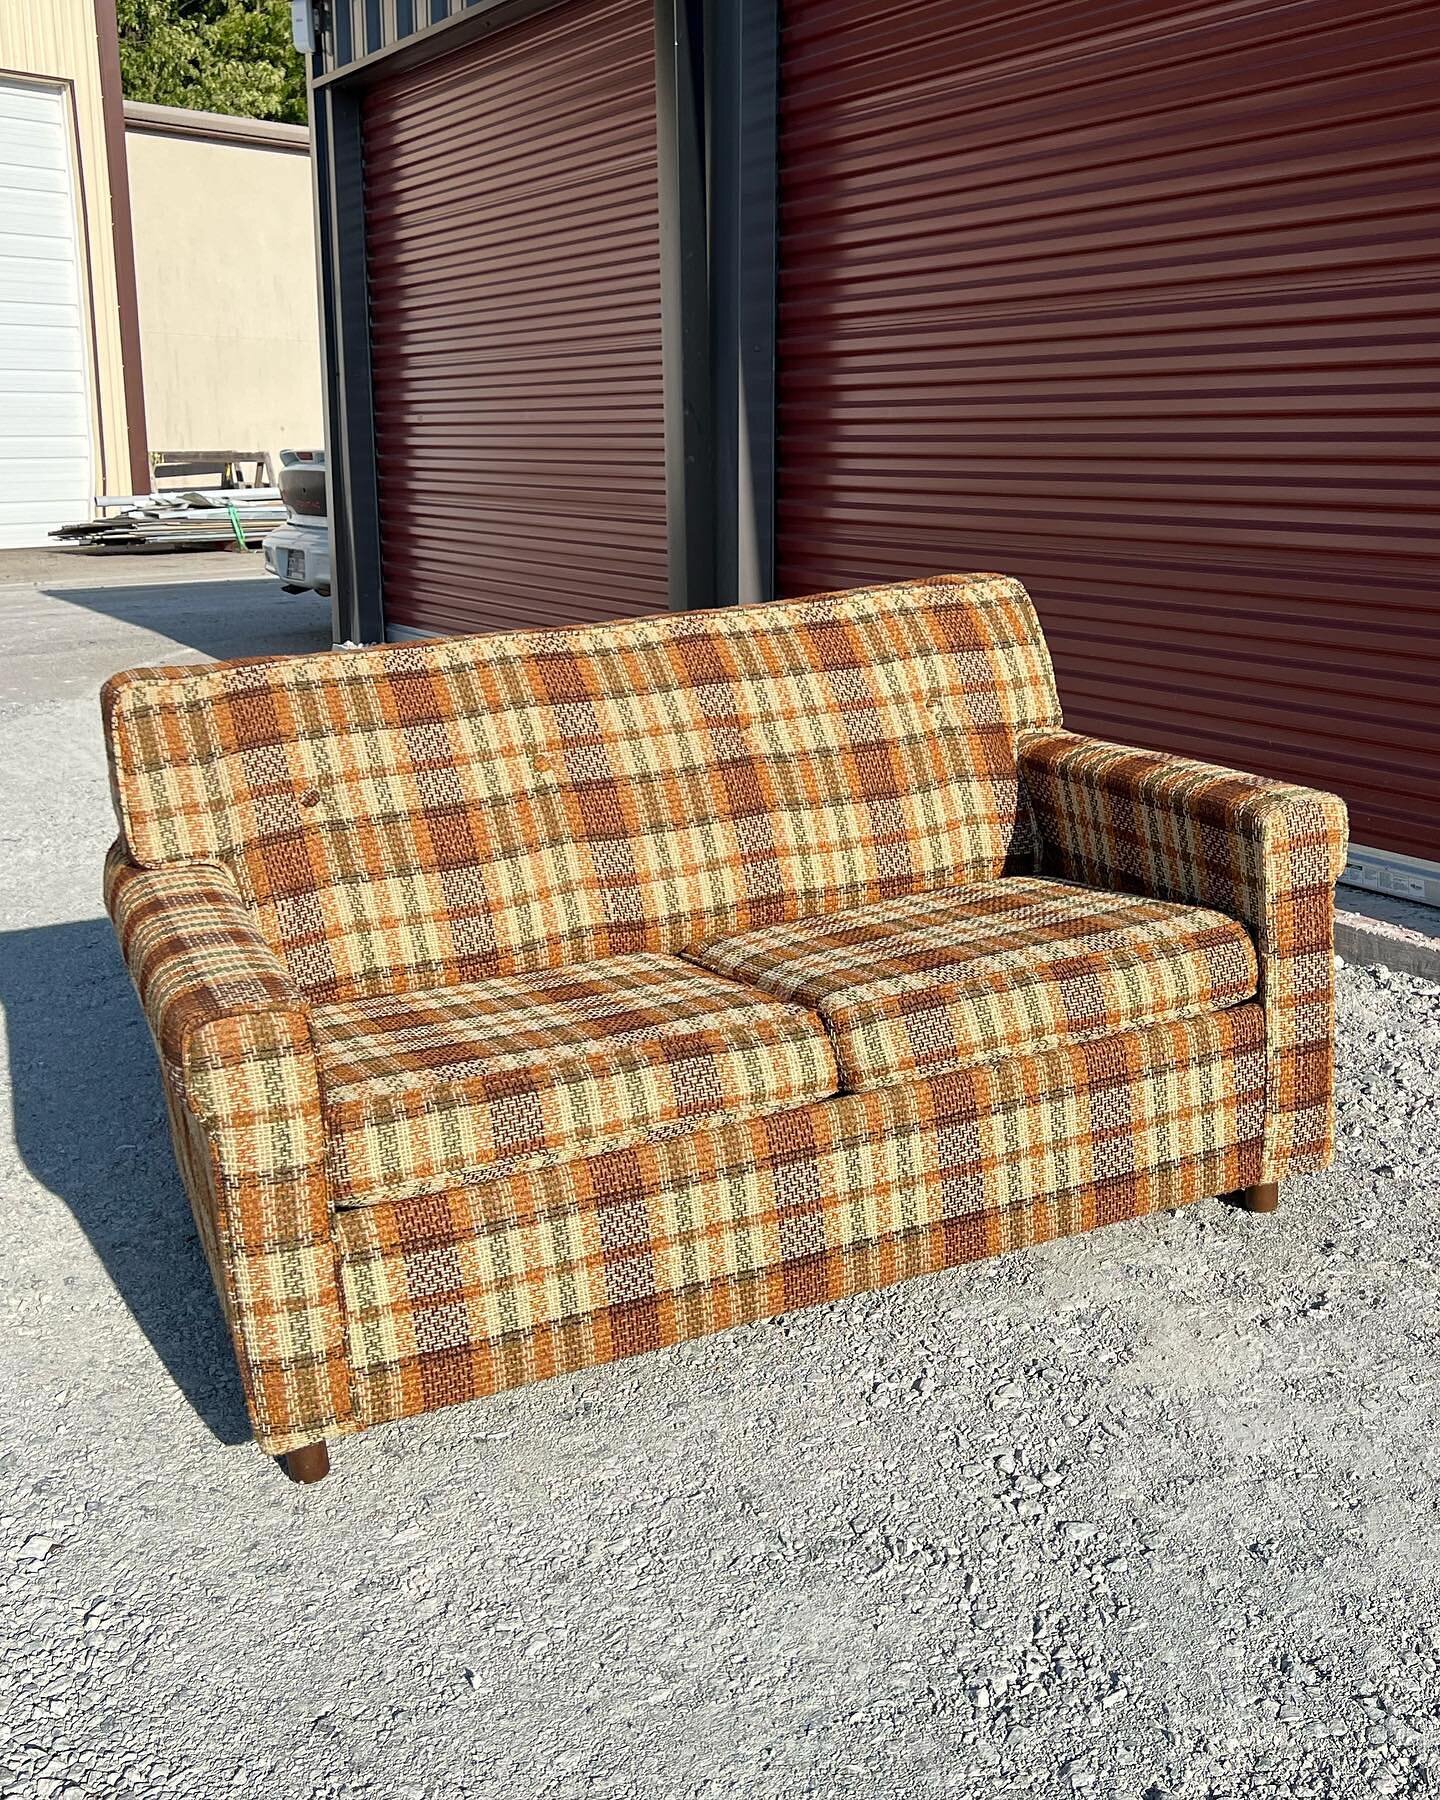 ✨SOLD✨ I&rsquo;ve had this little couch sittin&rsquo; pretty in the back of my storage unit for too long. Who needs a twin sized sleeper sofa?! 🌼

I don&rsquo;t know about you, but we&rsquo;ve got a little loveseat like this in our garage for when w